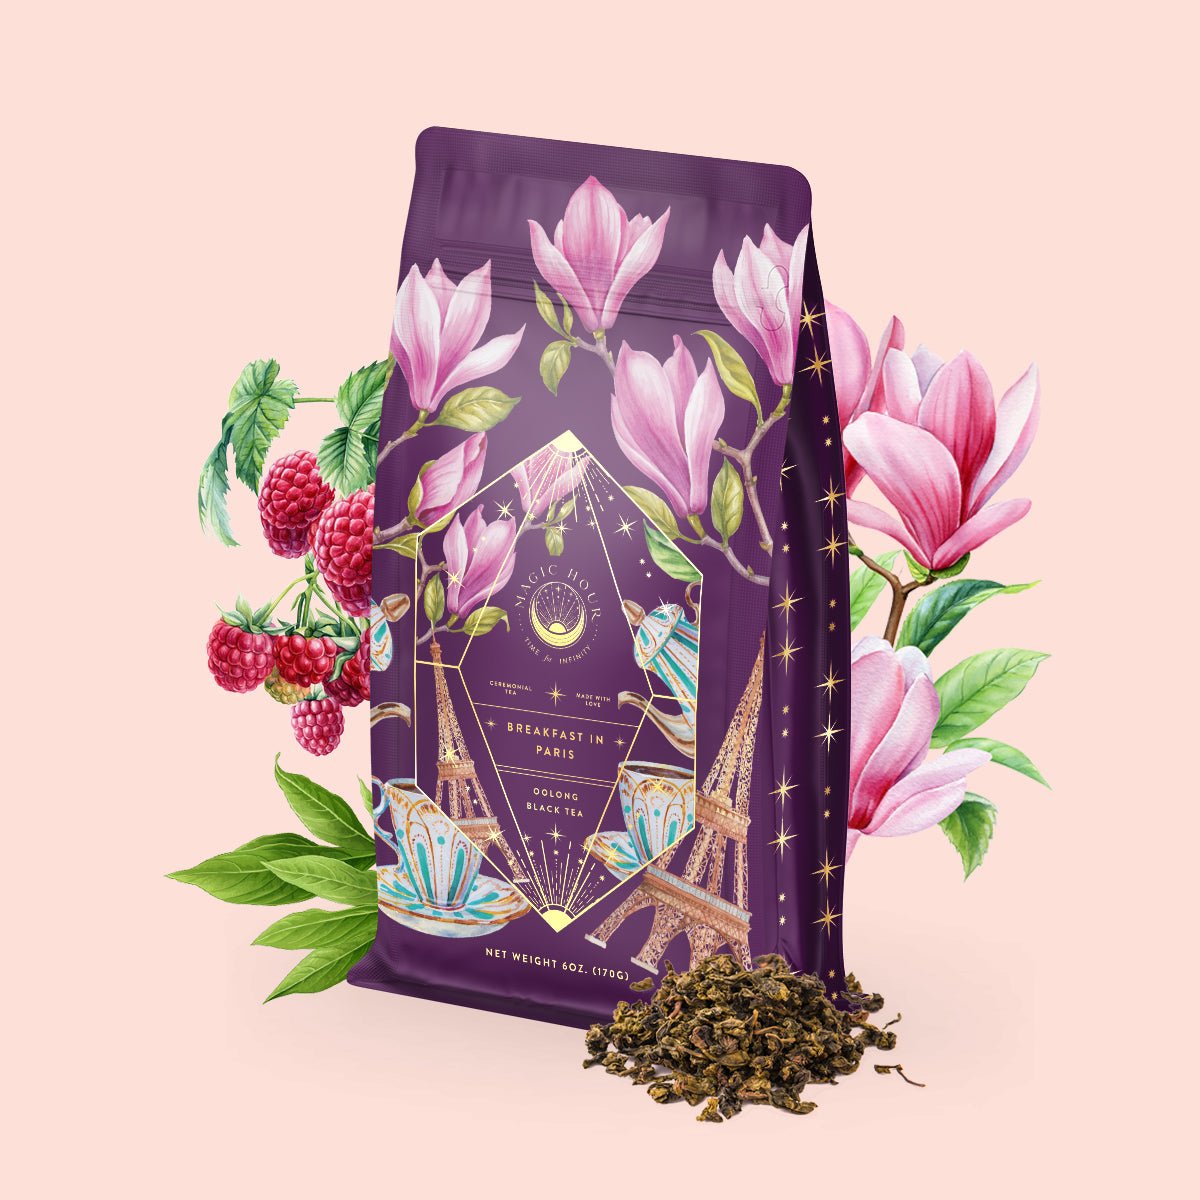 Breakfast in Paris-Oolong Black Tea Scented with Fruits &amp; Flowers of Secret Parisian Gardens-Luxe Pouch (Refill your Jar with 75 Cups)-Magic Hour